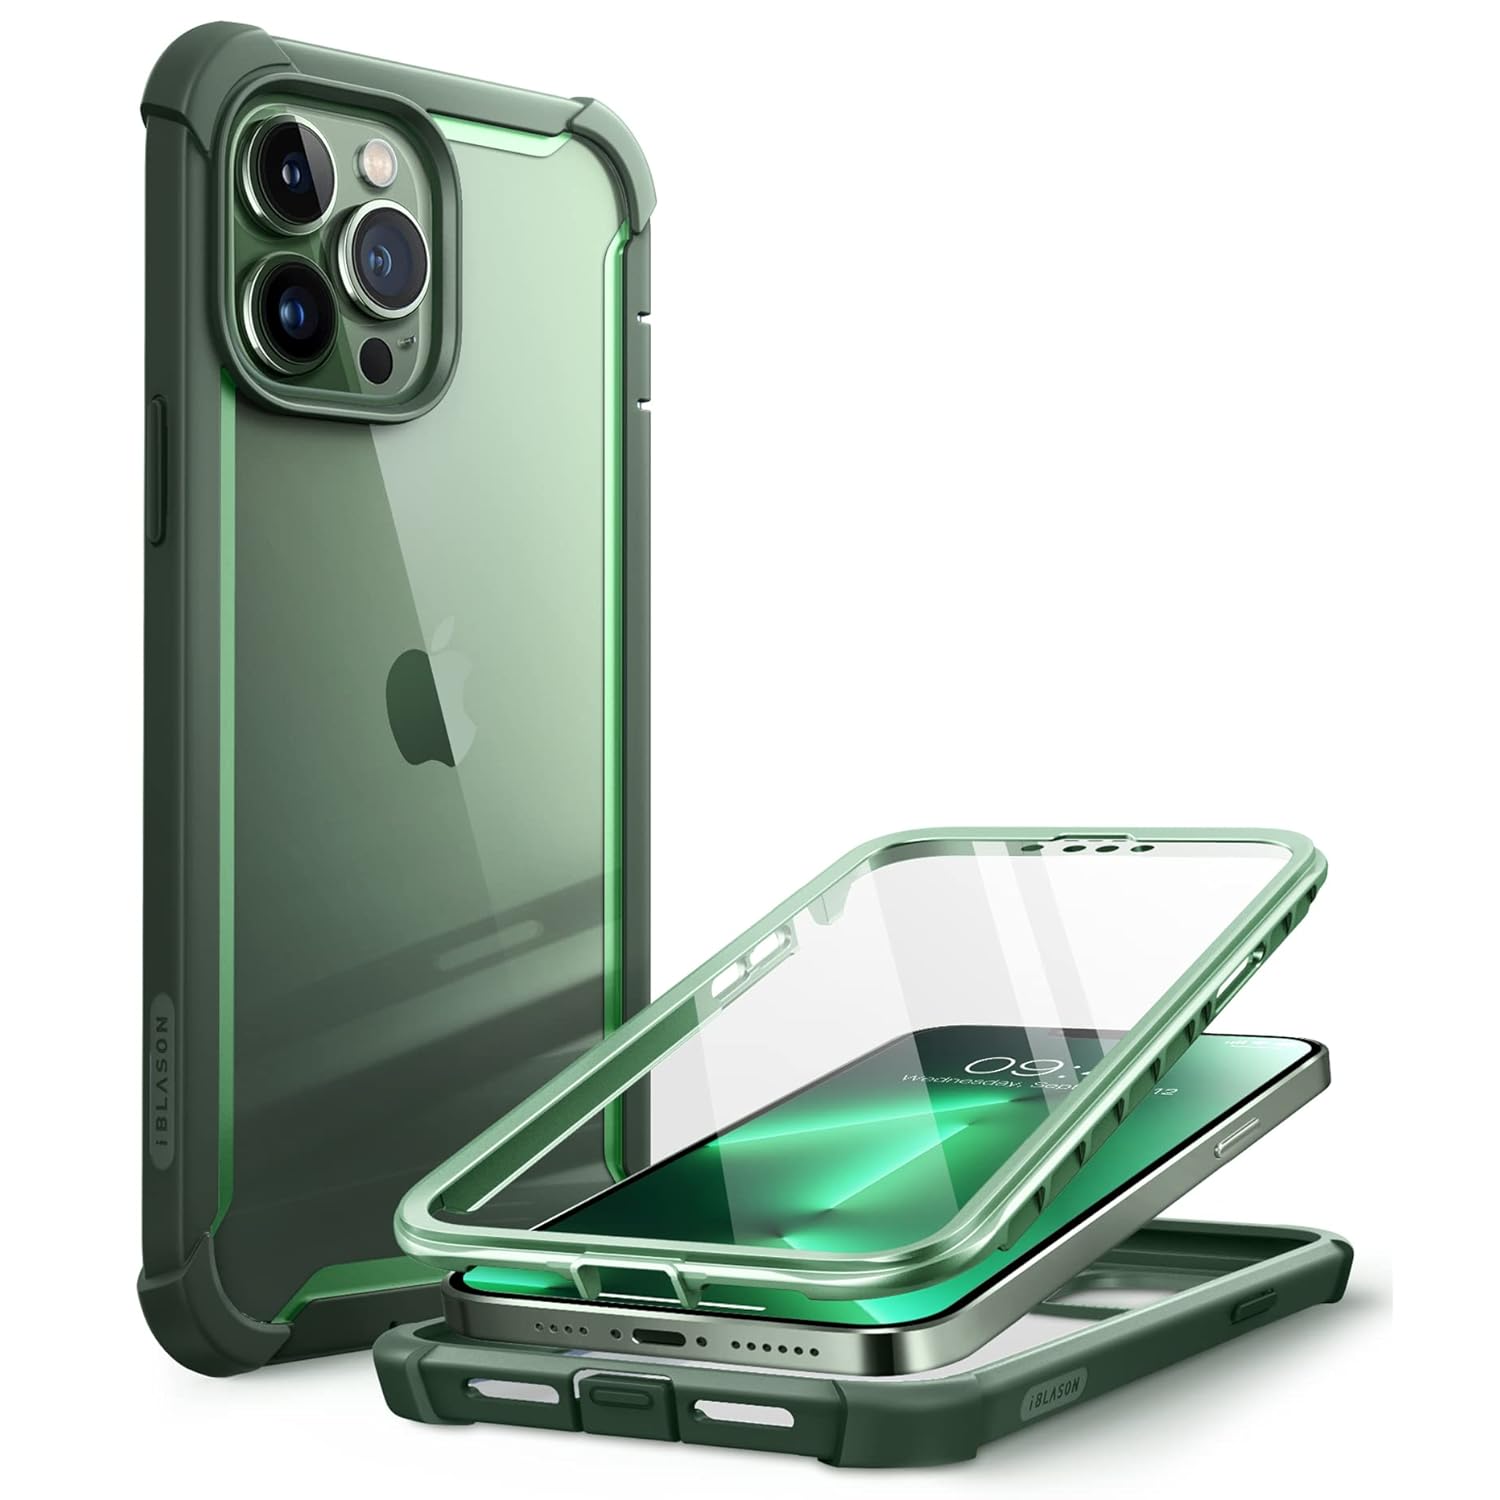 Zell Electronics Zell Ares Case For Iphone 13 Pro Max 6.7 Inch (2021 Release), Dual Layer Rugged Clear Bumper Case With Built-In Screen Protec…